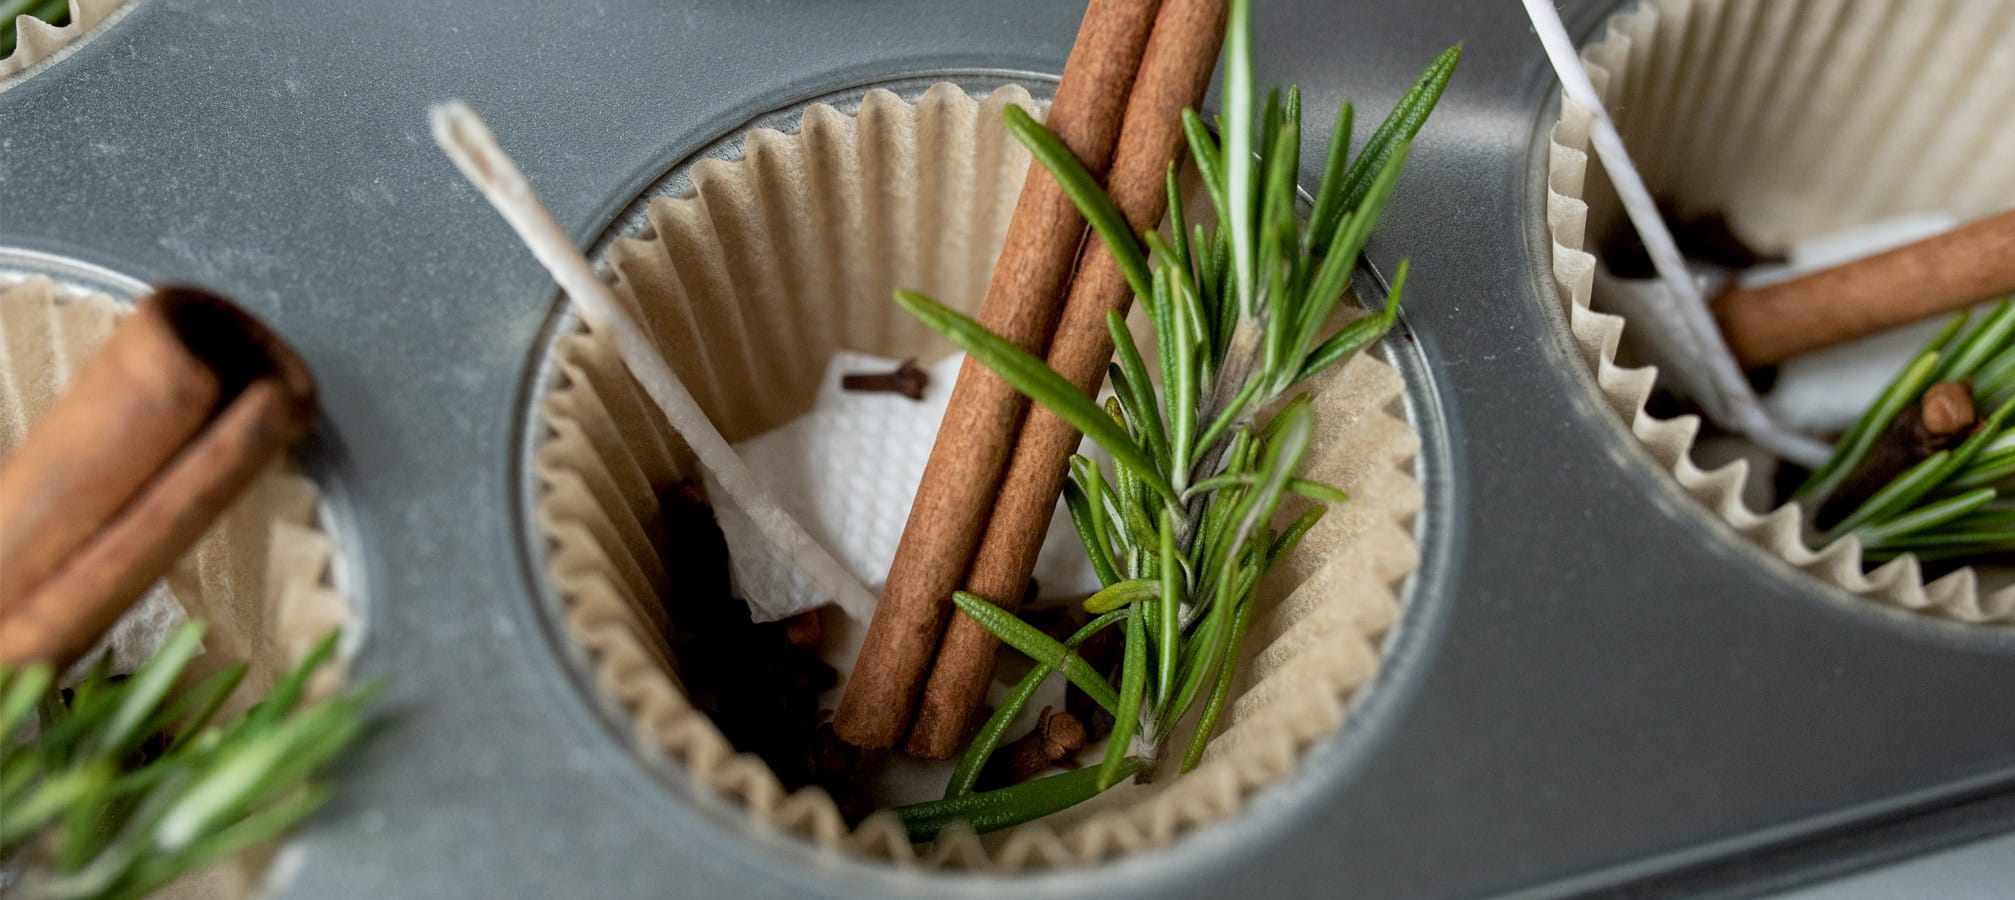 Rosemary and cinnamon in a muffin tin.